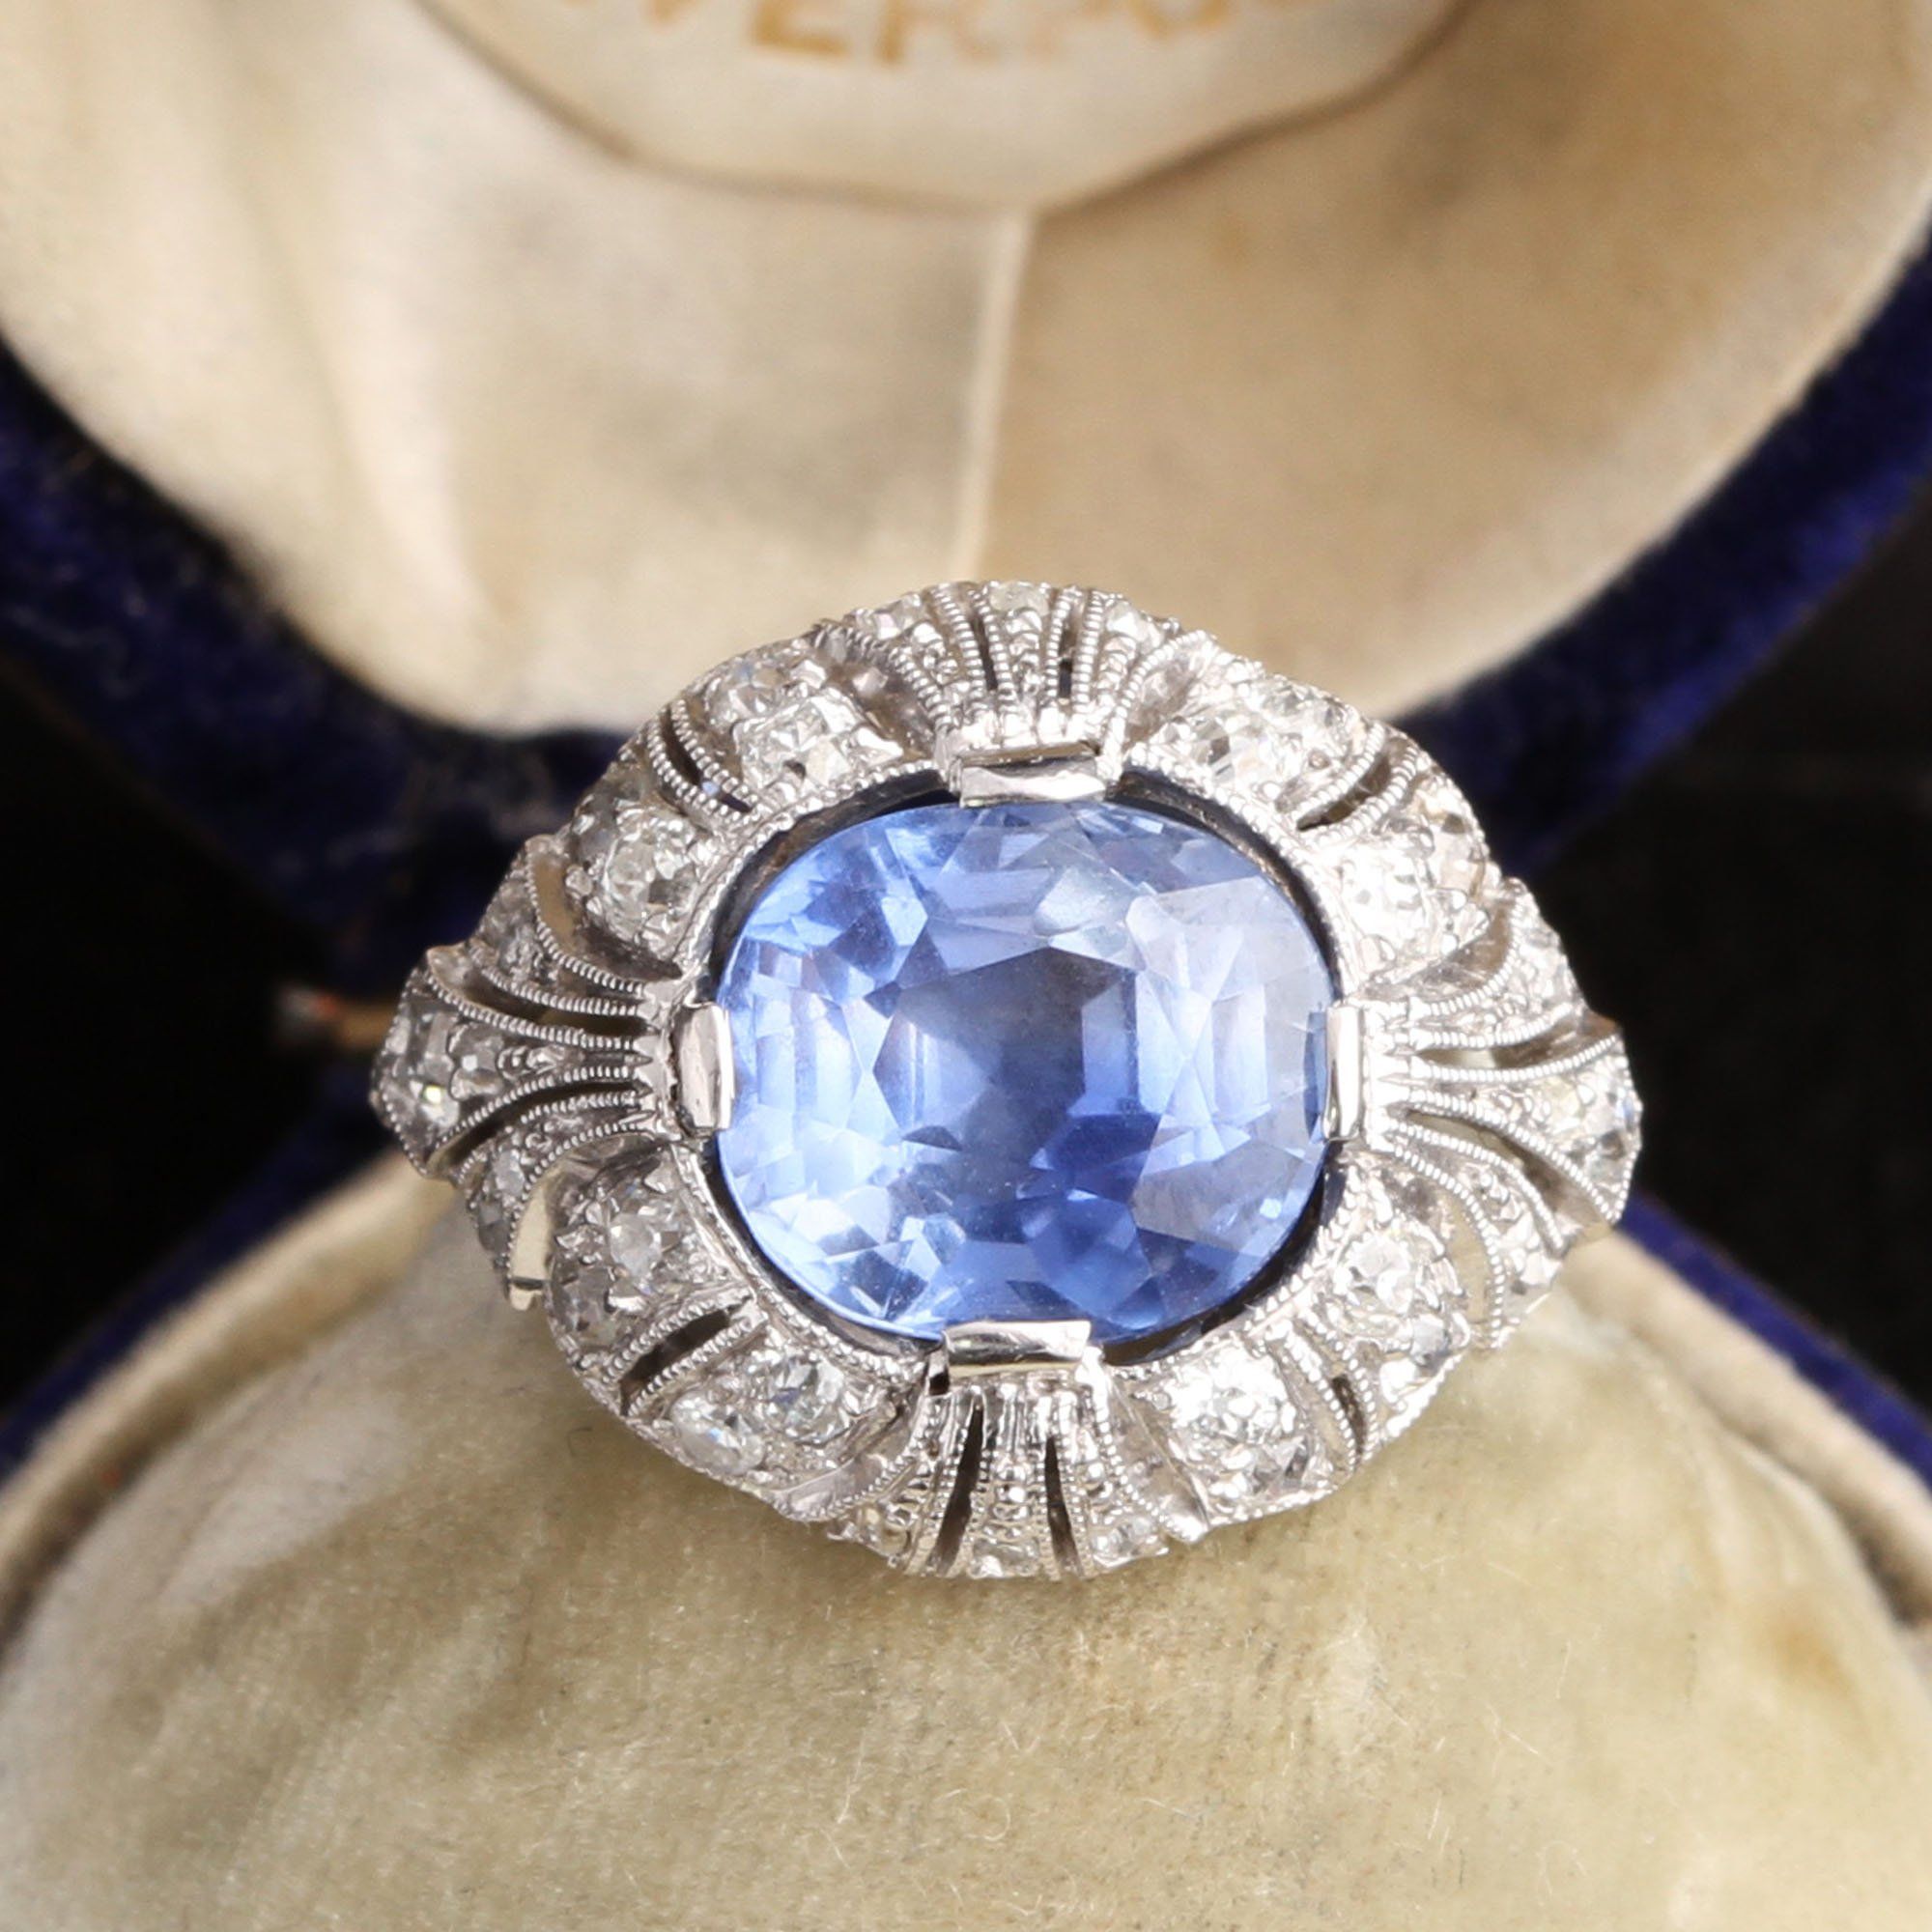 1930s French 8.71ct Oval Ceylon Sapphire Ring – Irene Byrne & Co